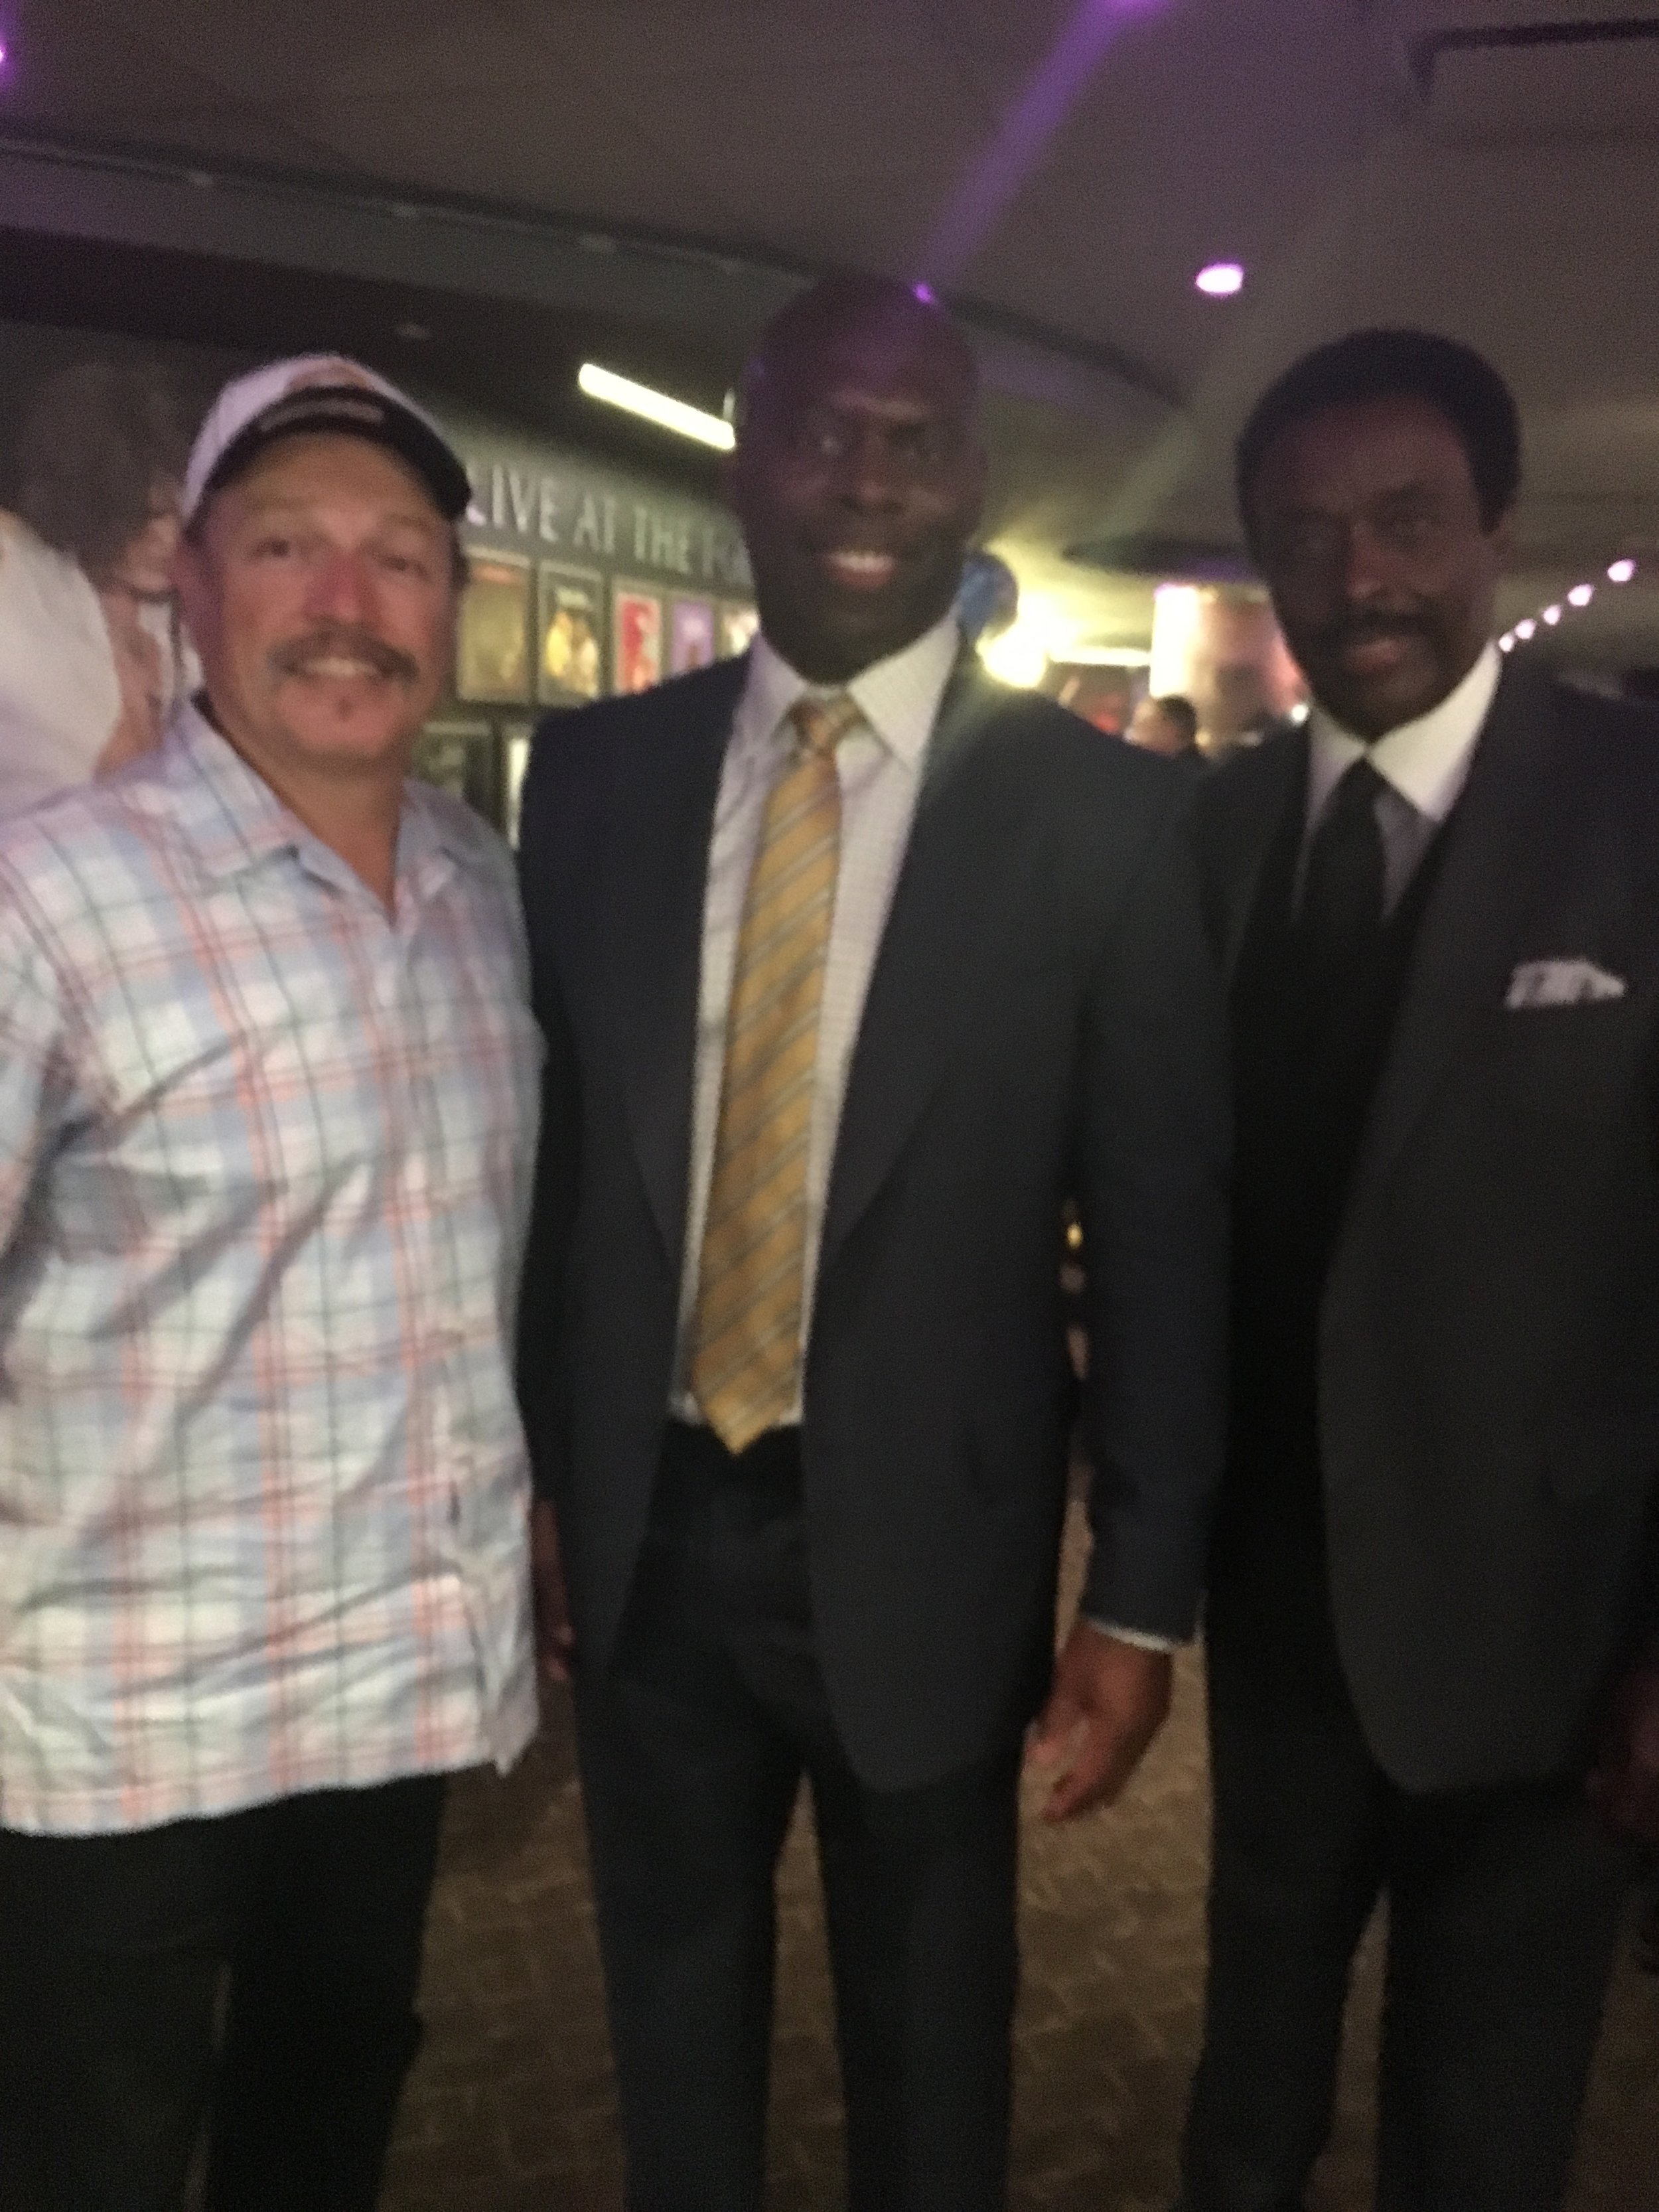 Tony with San Diego Chargers coach Anthony Lynn and CBS newscaster Jim Hill